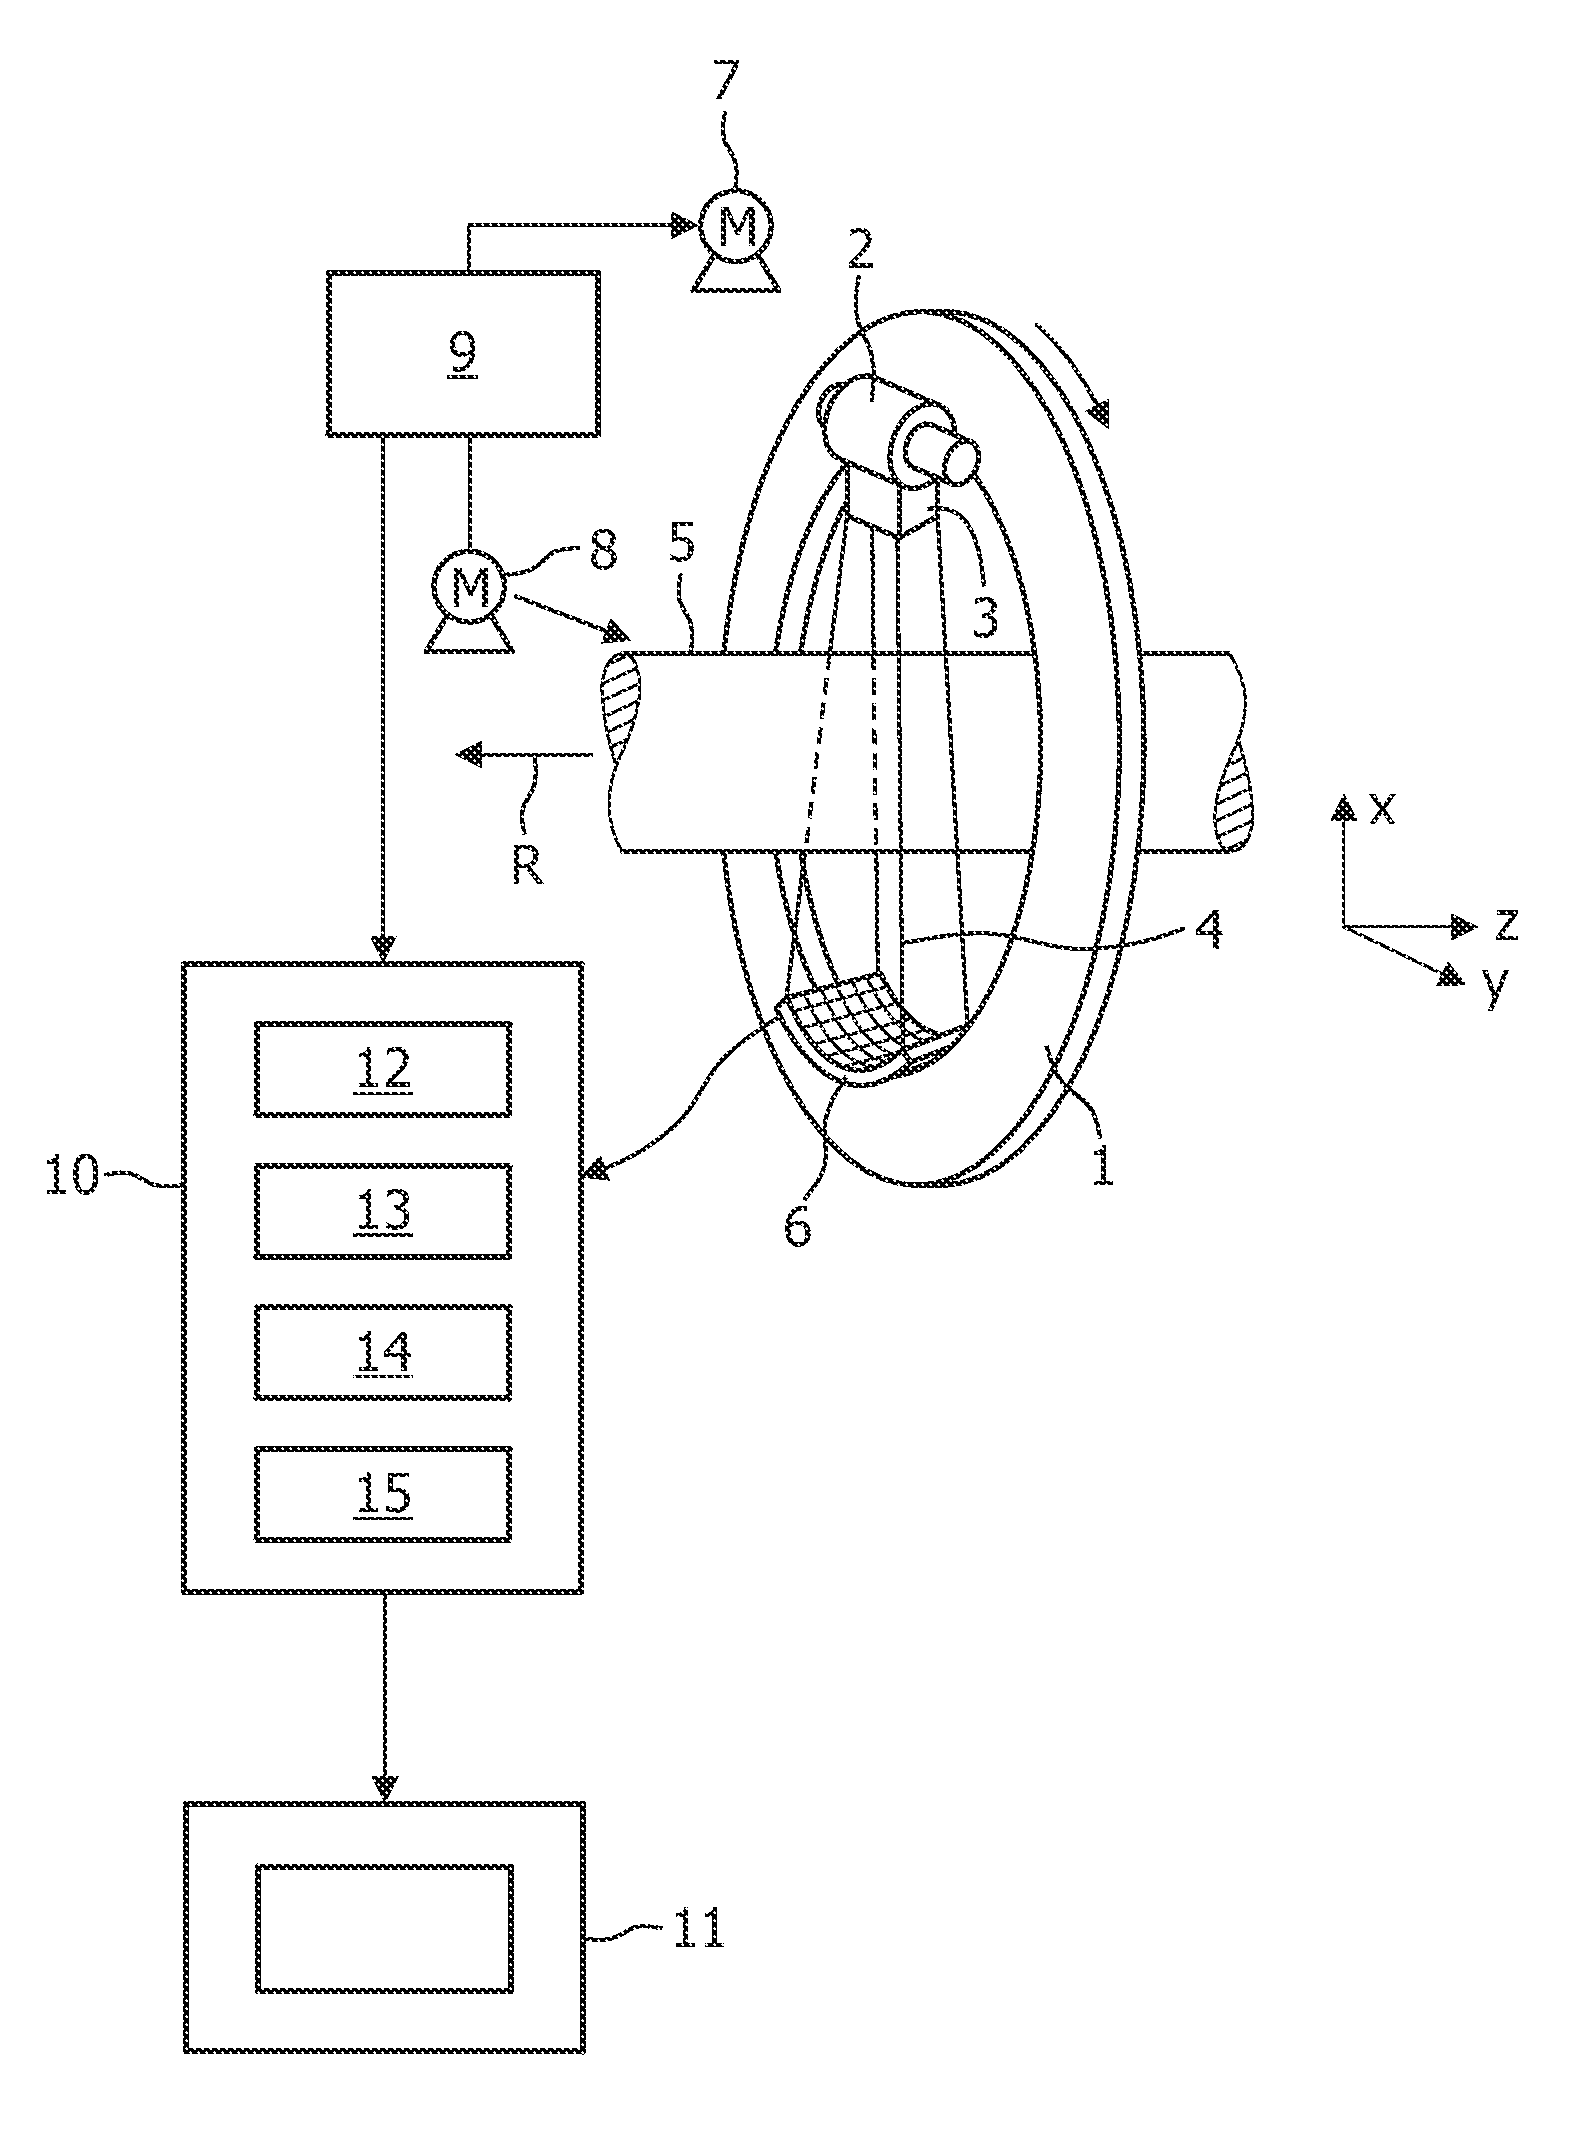 Imaging system and imaging method for imaging a region of interest